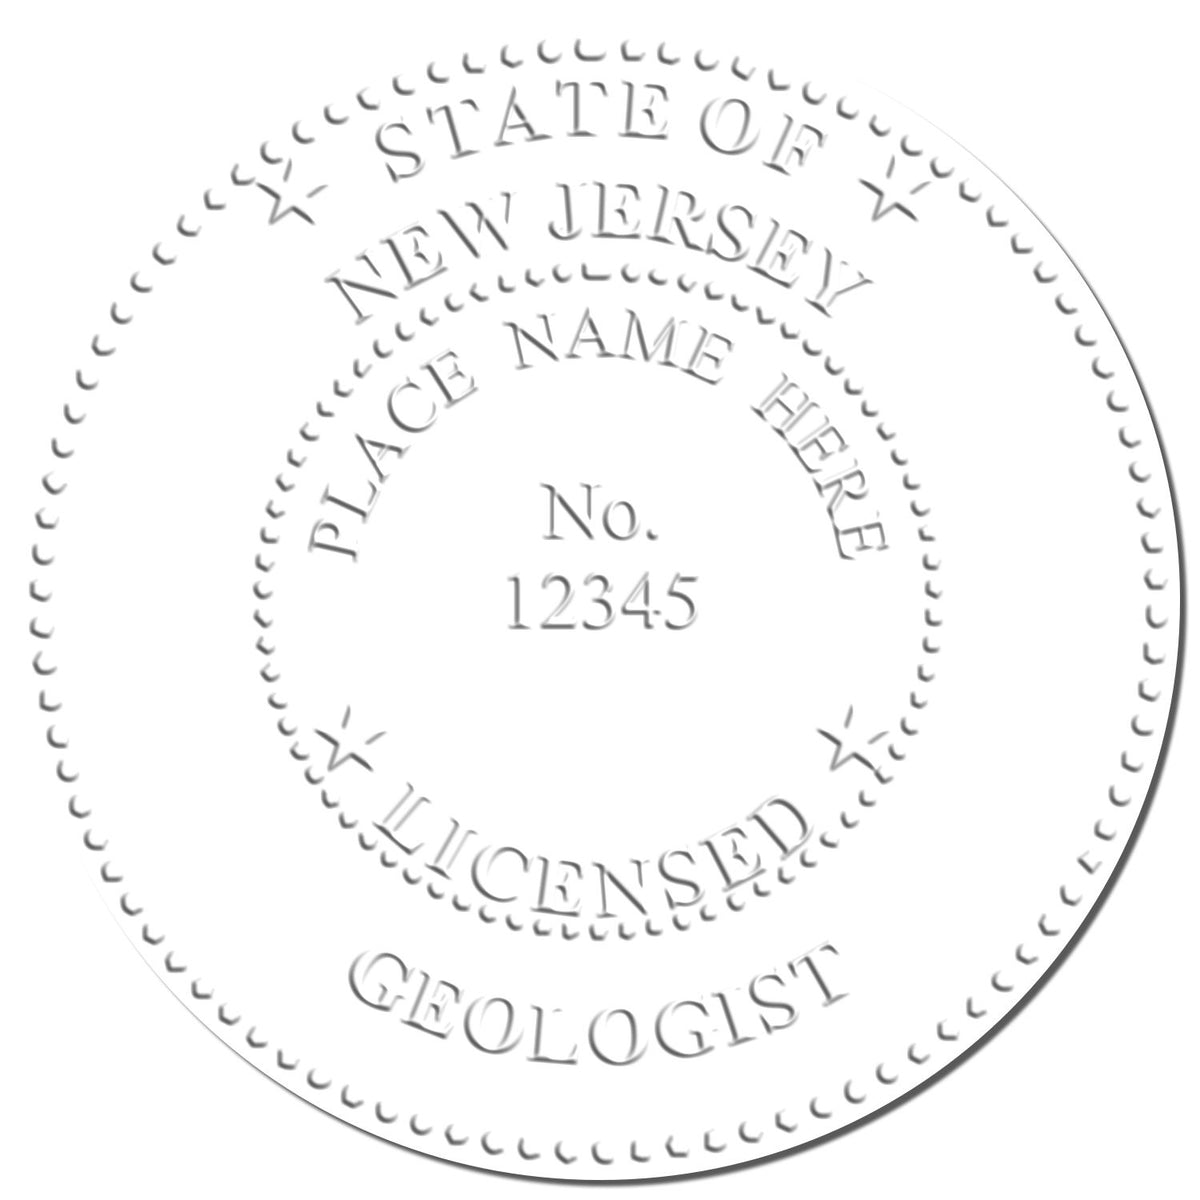 This paper is stamped with a sample imprint of the Handheld New Jersey Professional Geologist Embosser, signifying its quality and reliability.